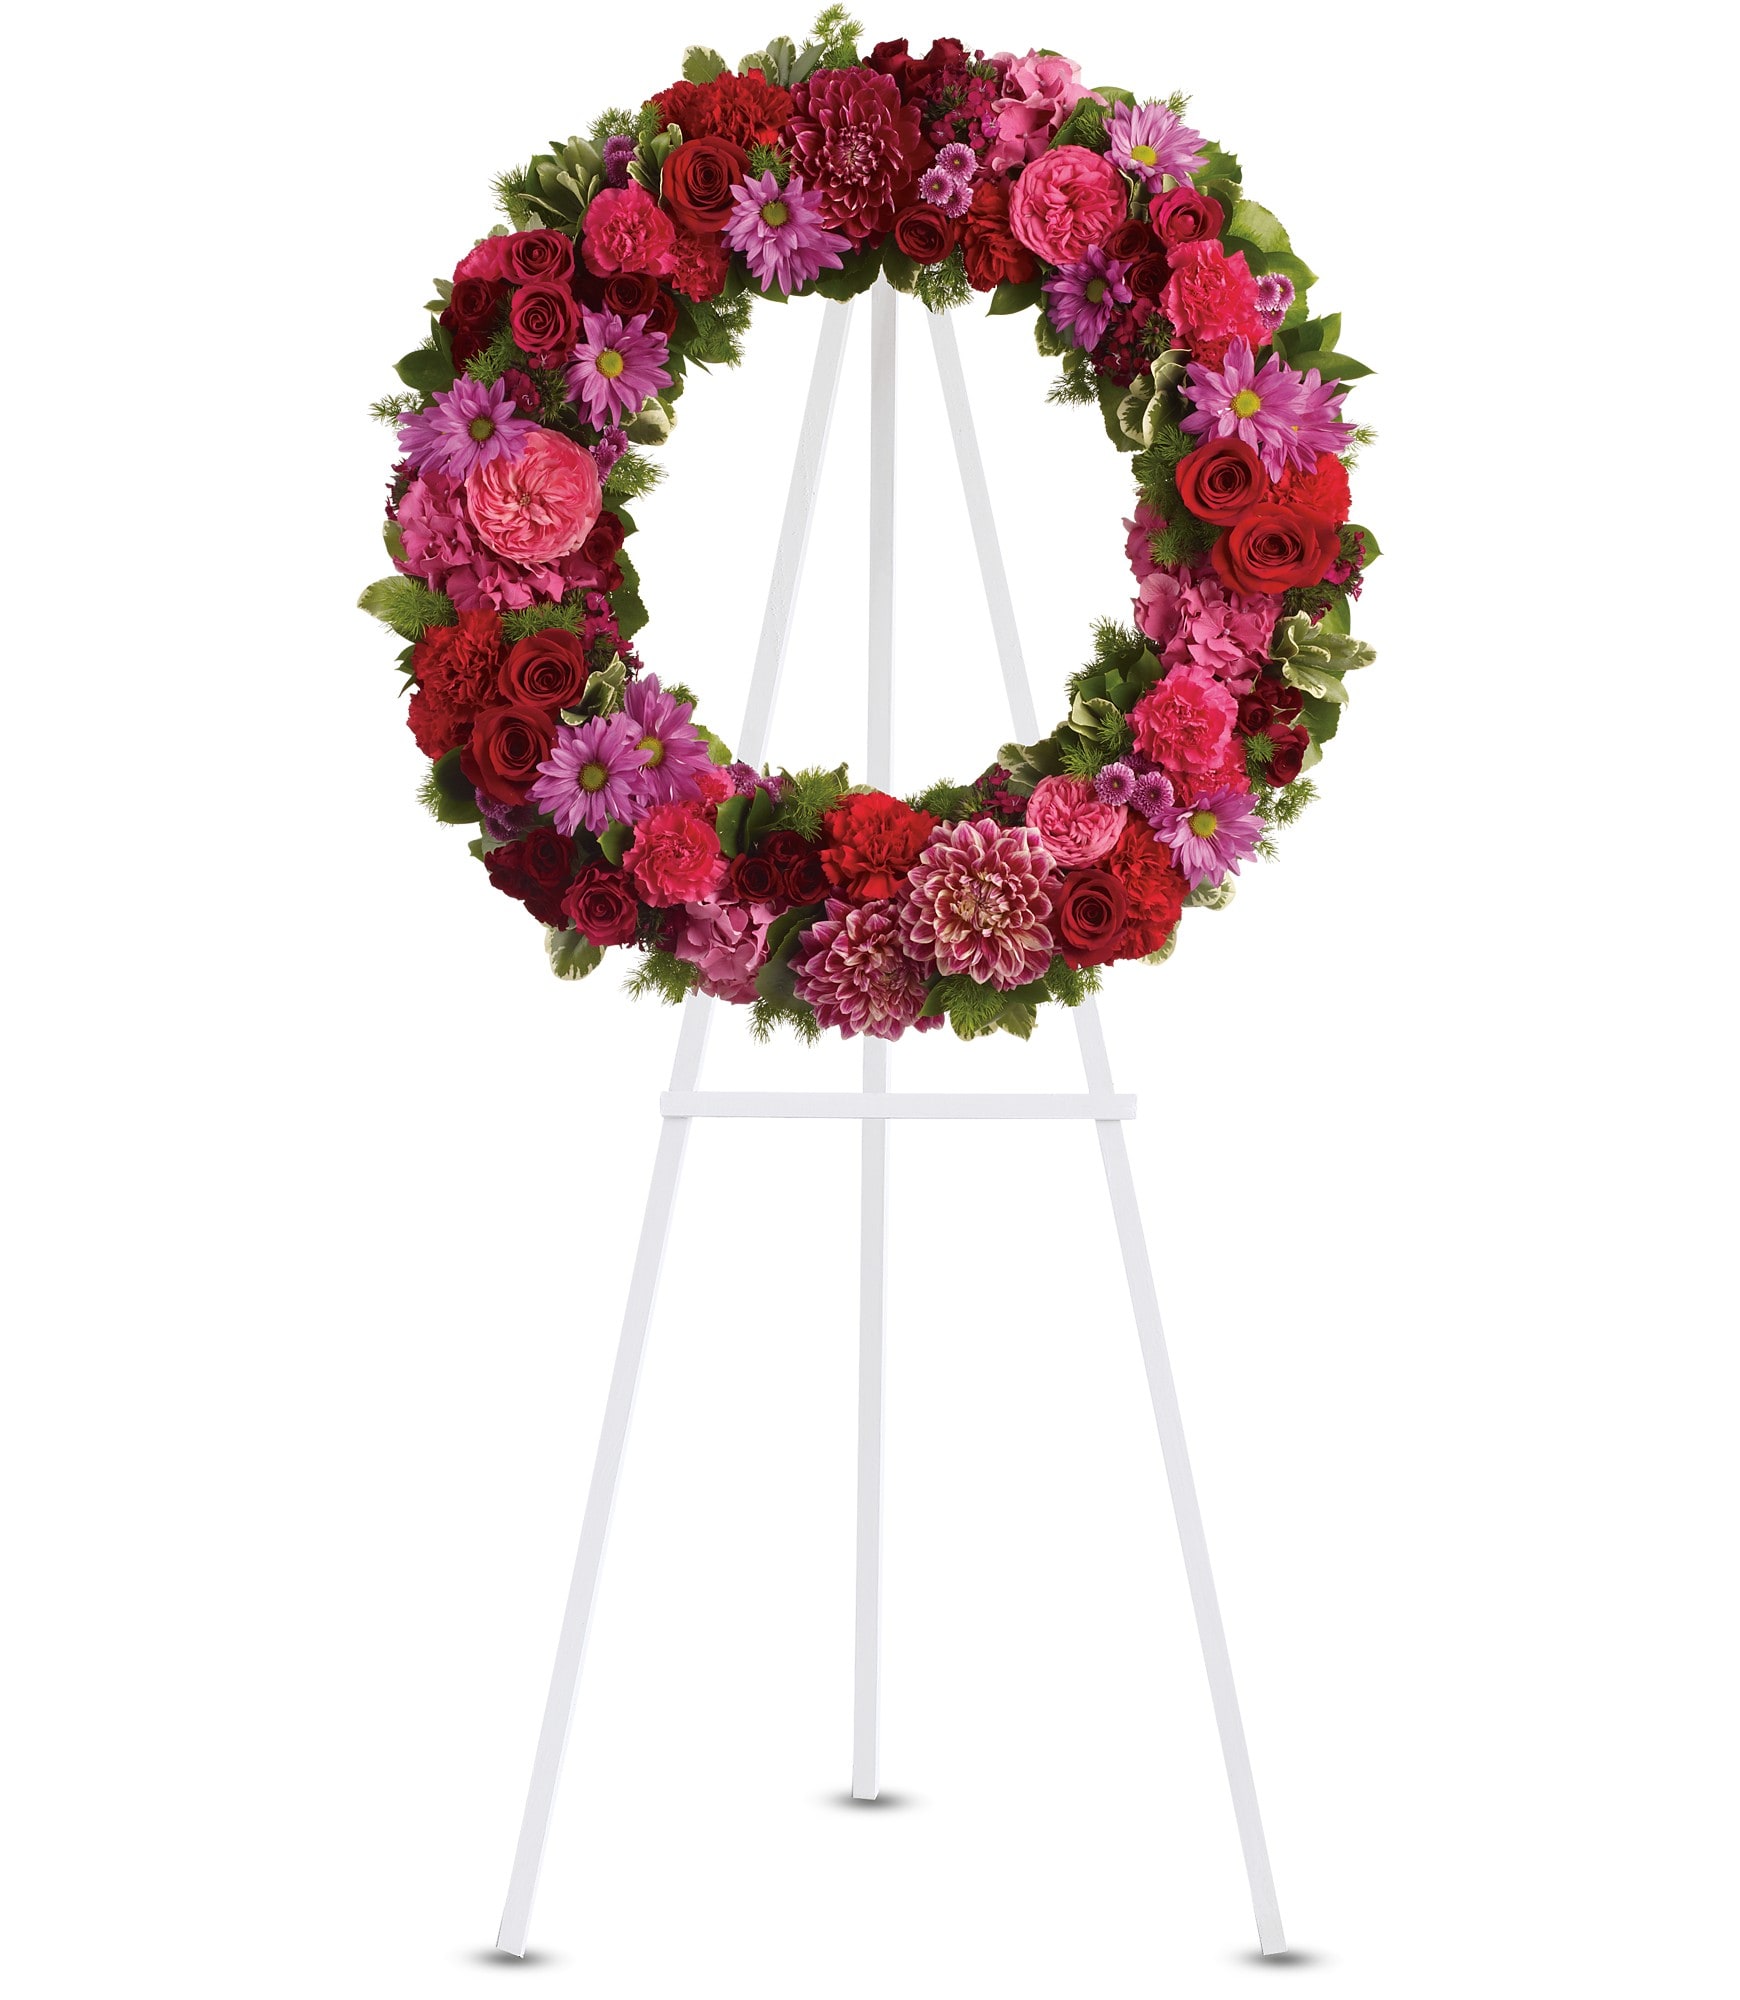 Infinite Love by Teleflora - This beautiful wreath stands as a testament to the circle of life that must be acknowledged even in our saddest moments. It will surely be appreciated by all in attendance. 